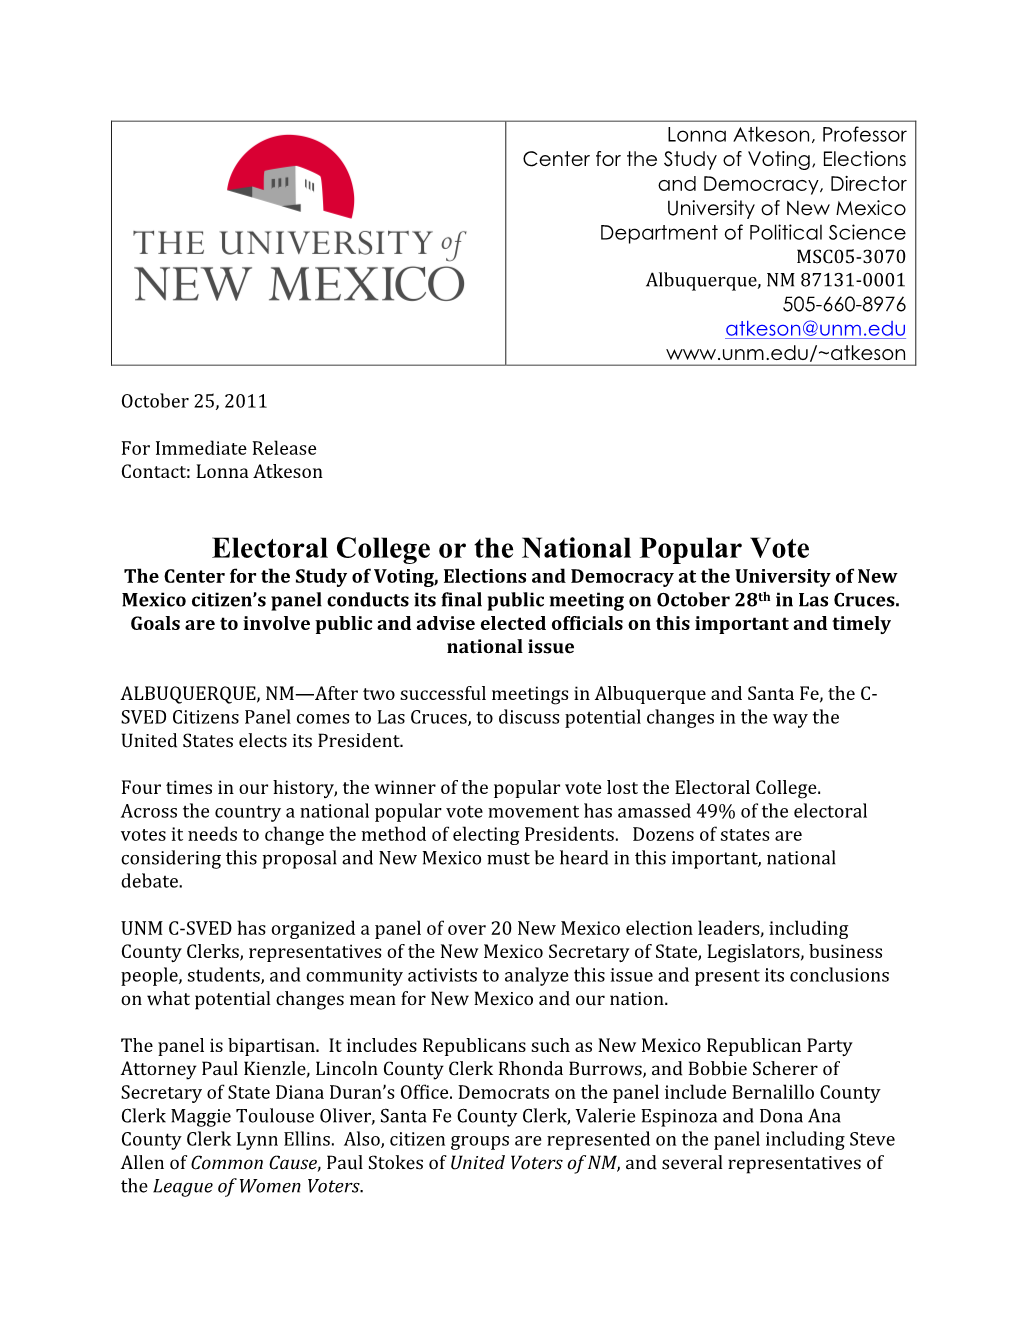 Electoral College Or the National Popular Vote